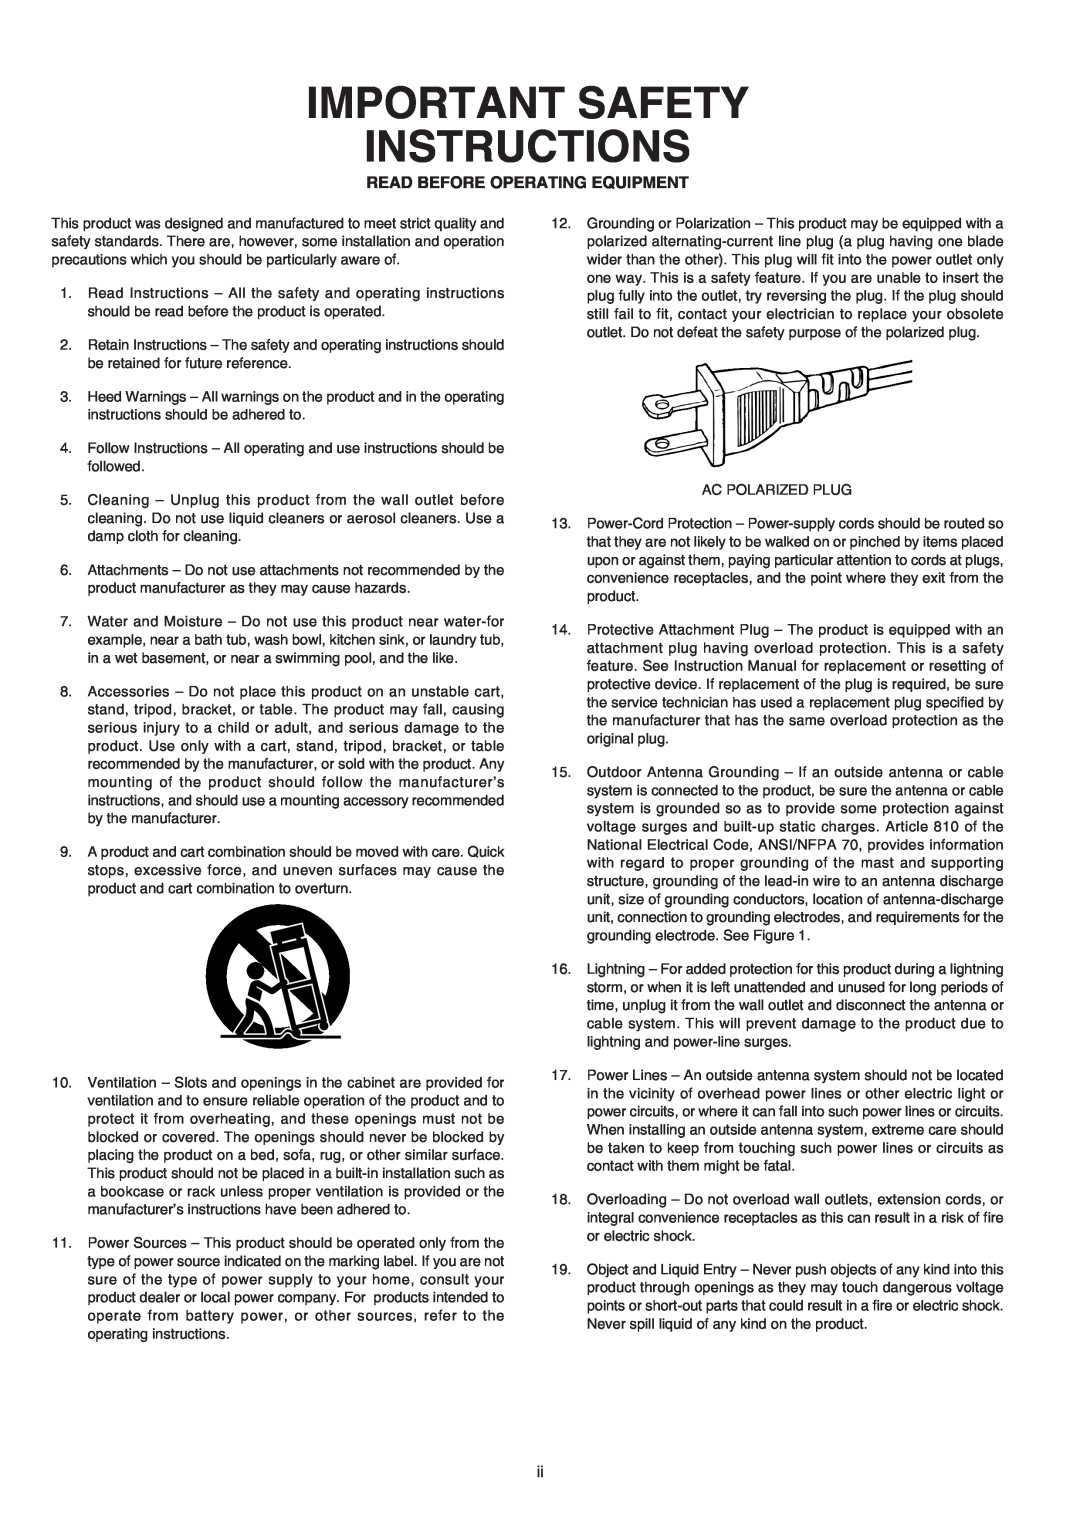 Marantz PMD505 manual Important Safety Instructions, Read Before Operating Equipment 